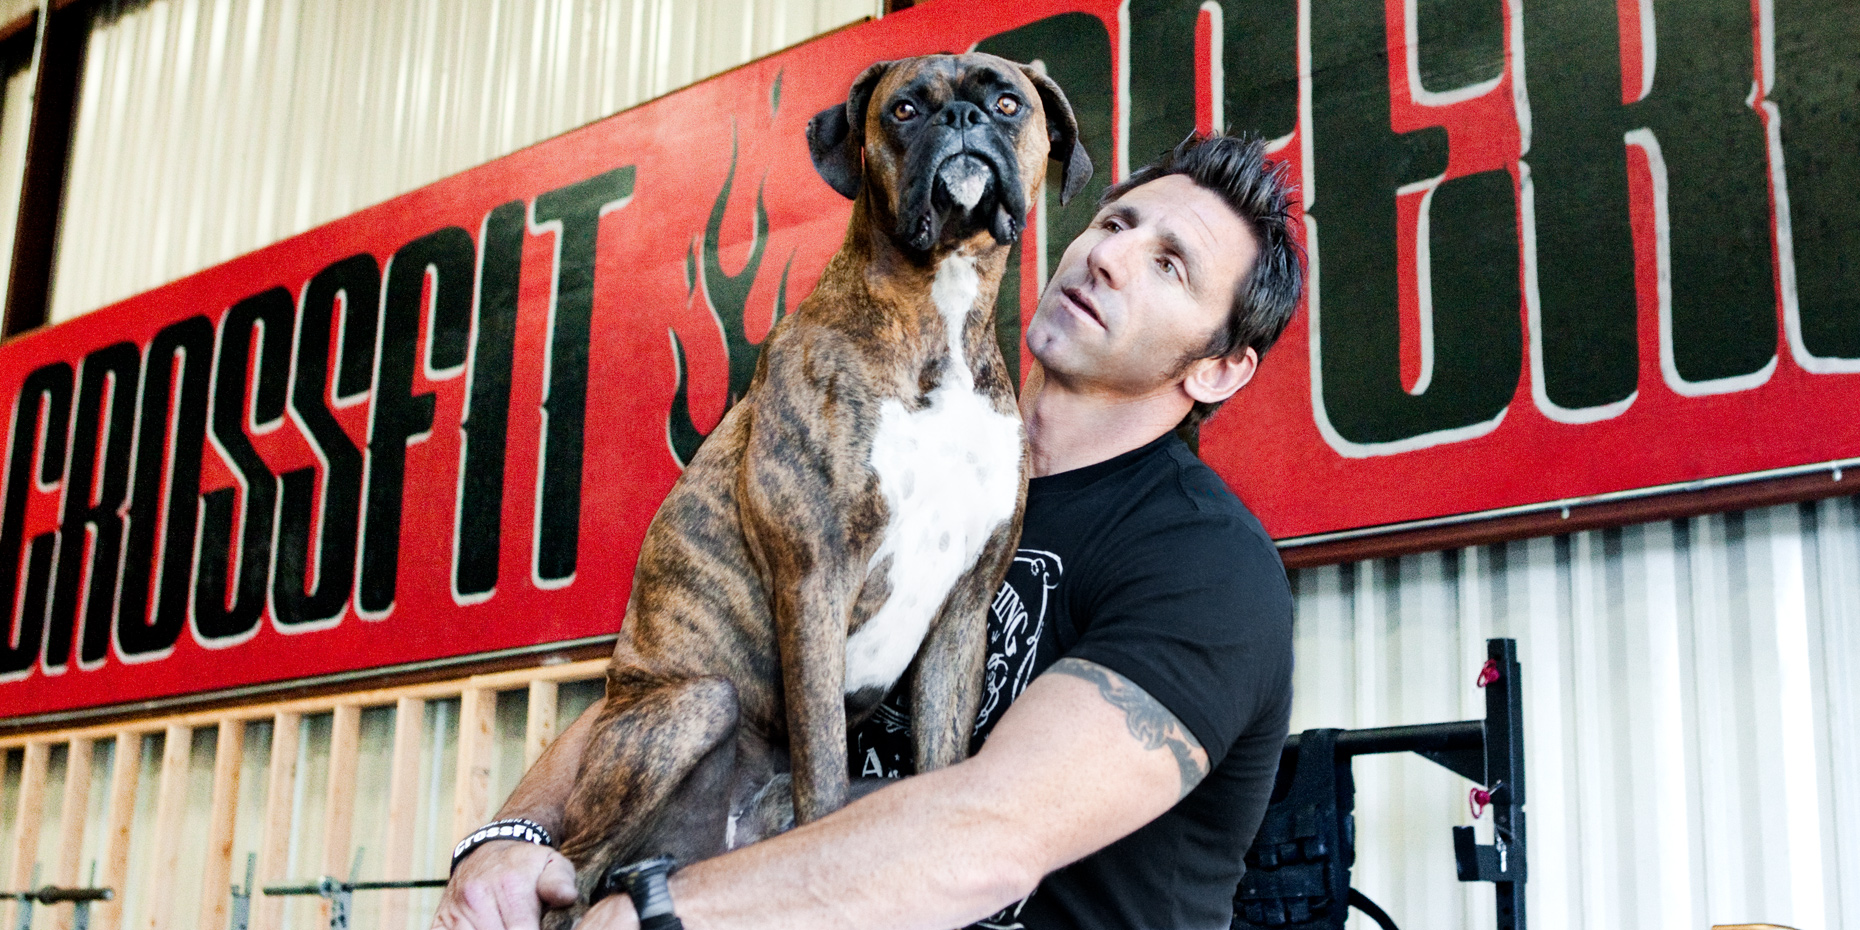 Crossfit, LA Dog Photography, Michael Brian, Los Angeles, Sports, Bill Grundler with Boxer dog, Crossfit Inferno